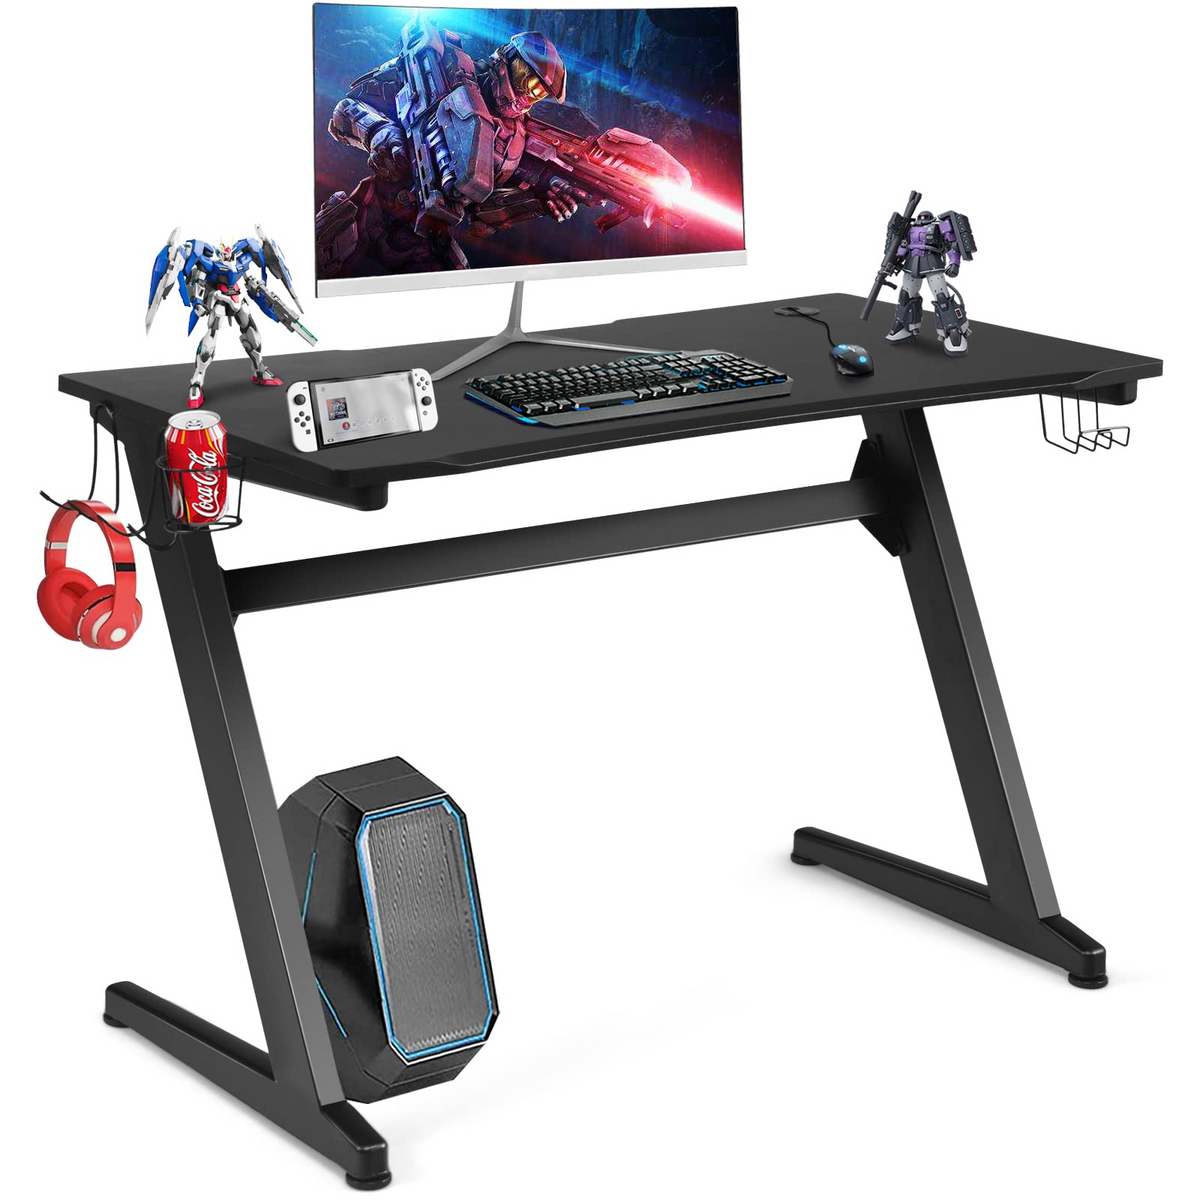 Goplus 45.5 Gaming Desk, Z Shaped Racing Game Table with Carbon Fiber Surface, Mouse Mat - GoplusUS